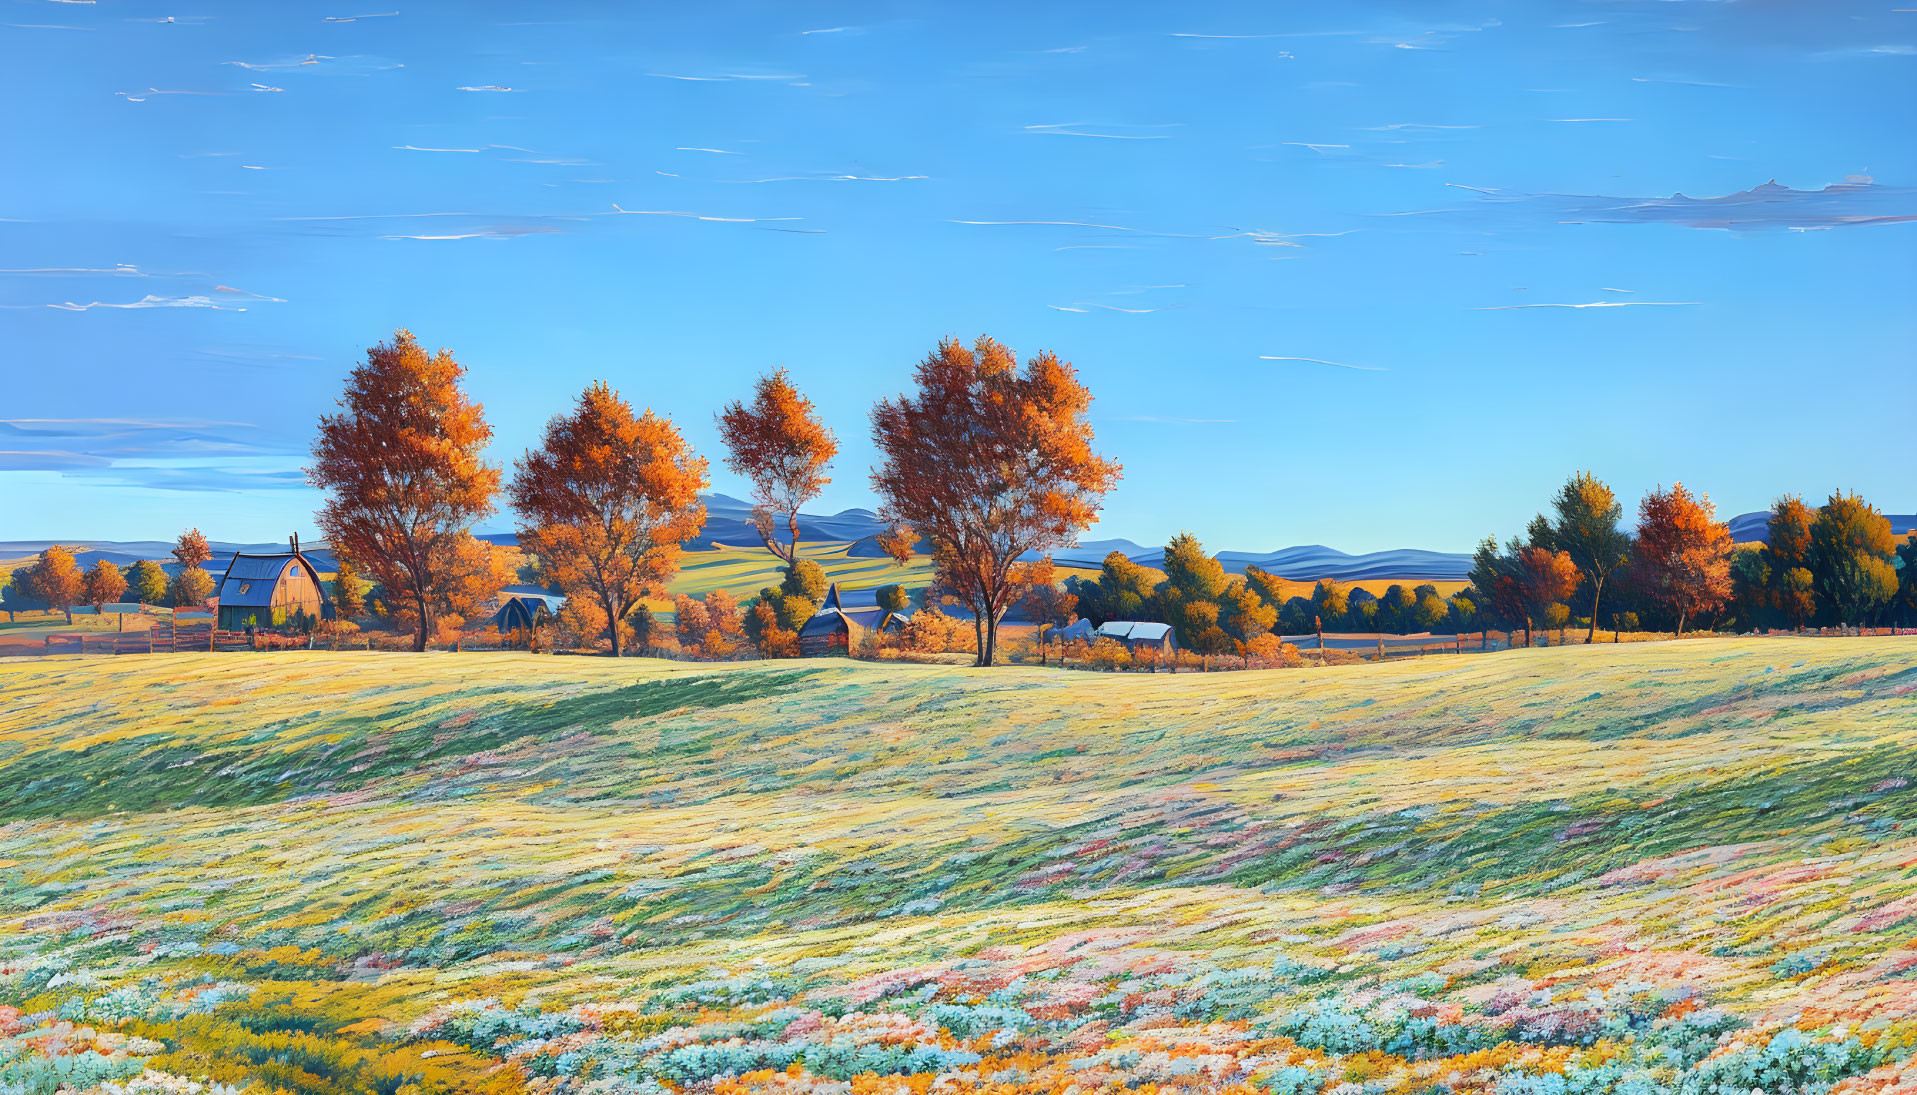 Colorful Flower Field and Autumn Trees in a Pastoral Landscape